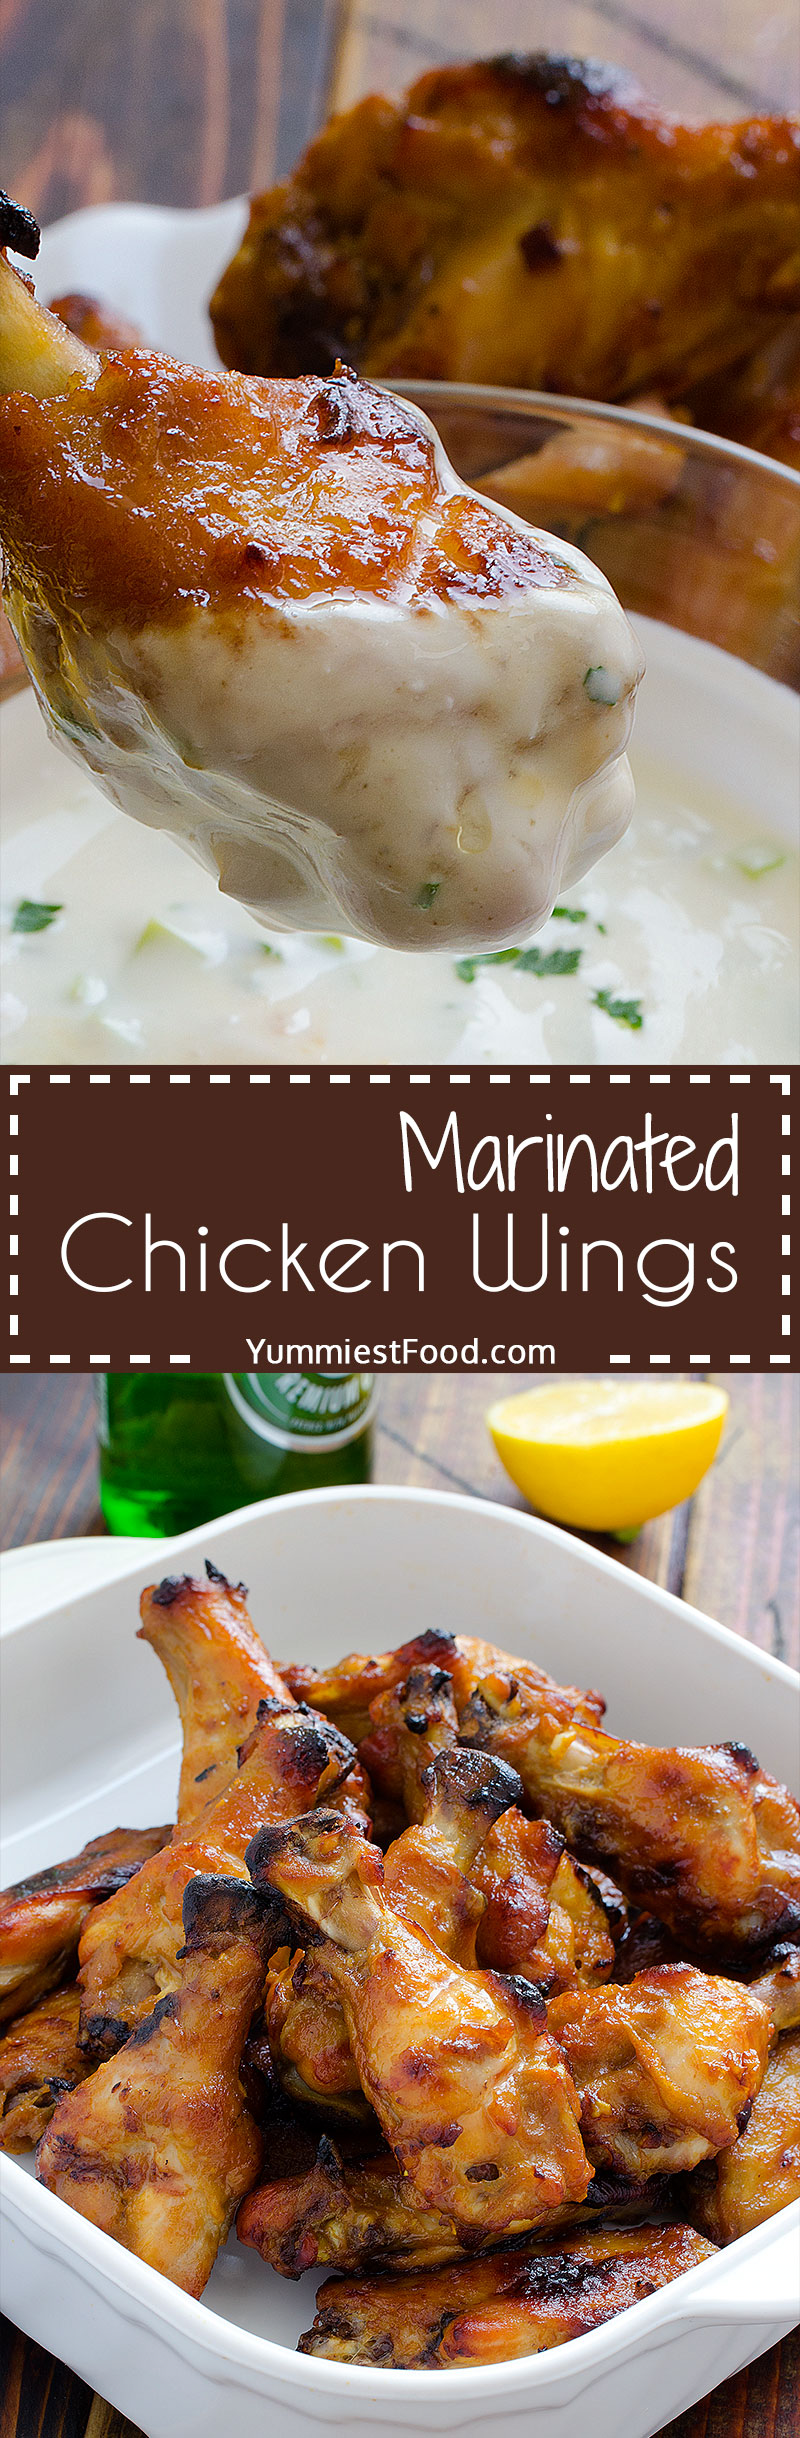 Marinated Chicken Wings - delicious and tasty dish which give the other dimension of preparing chicken wings